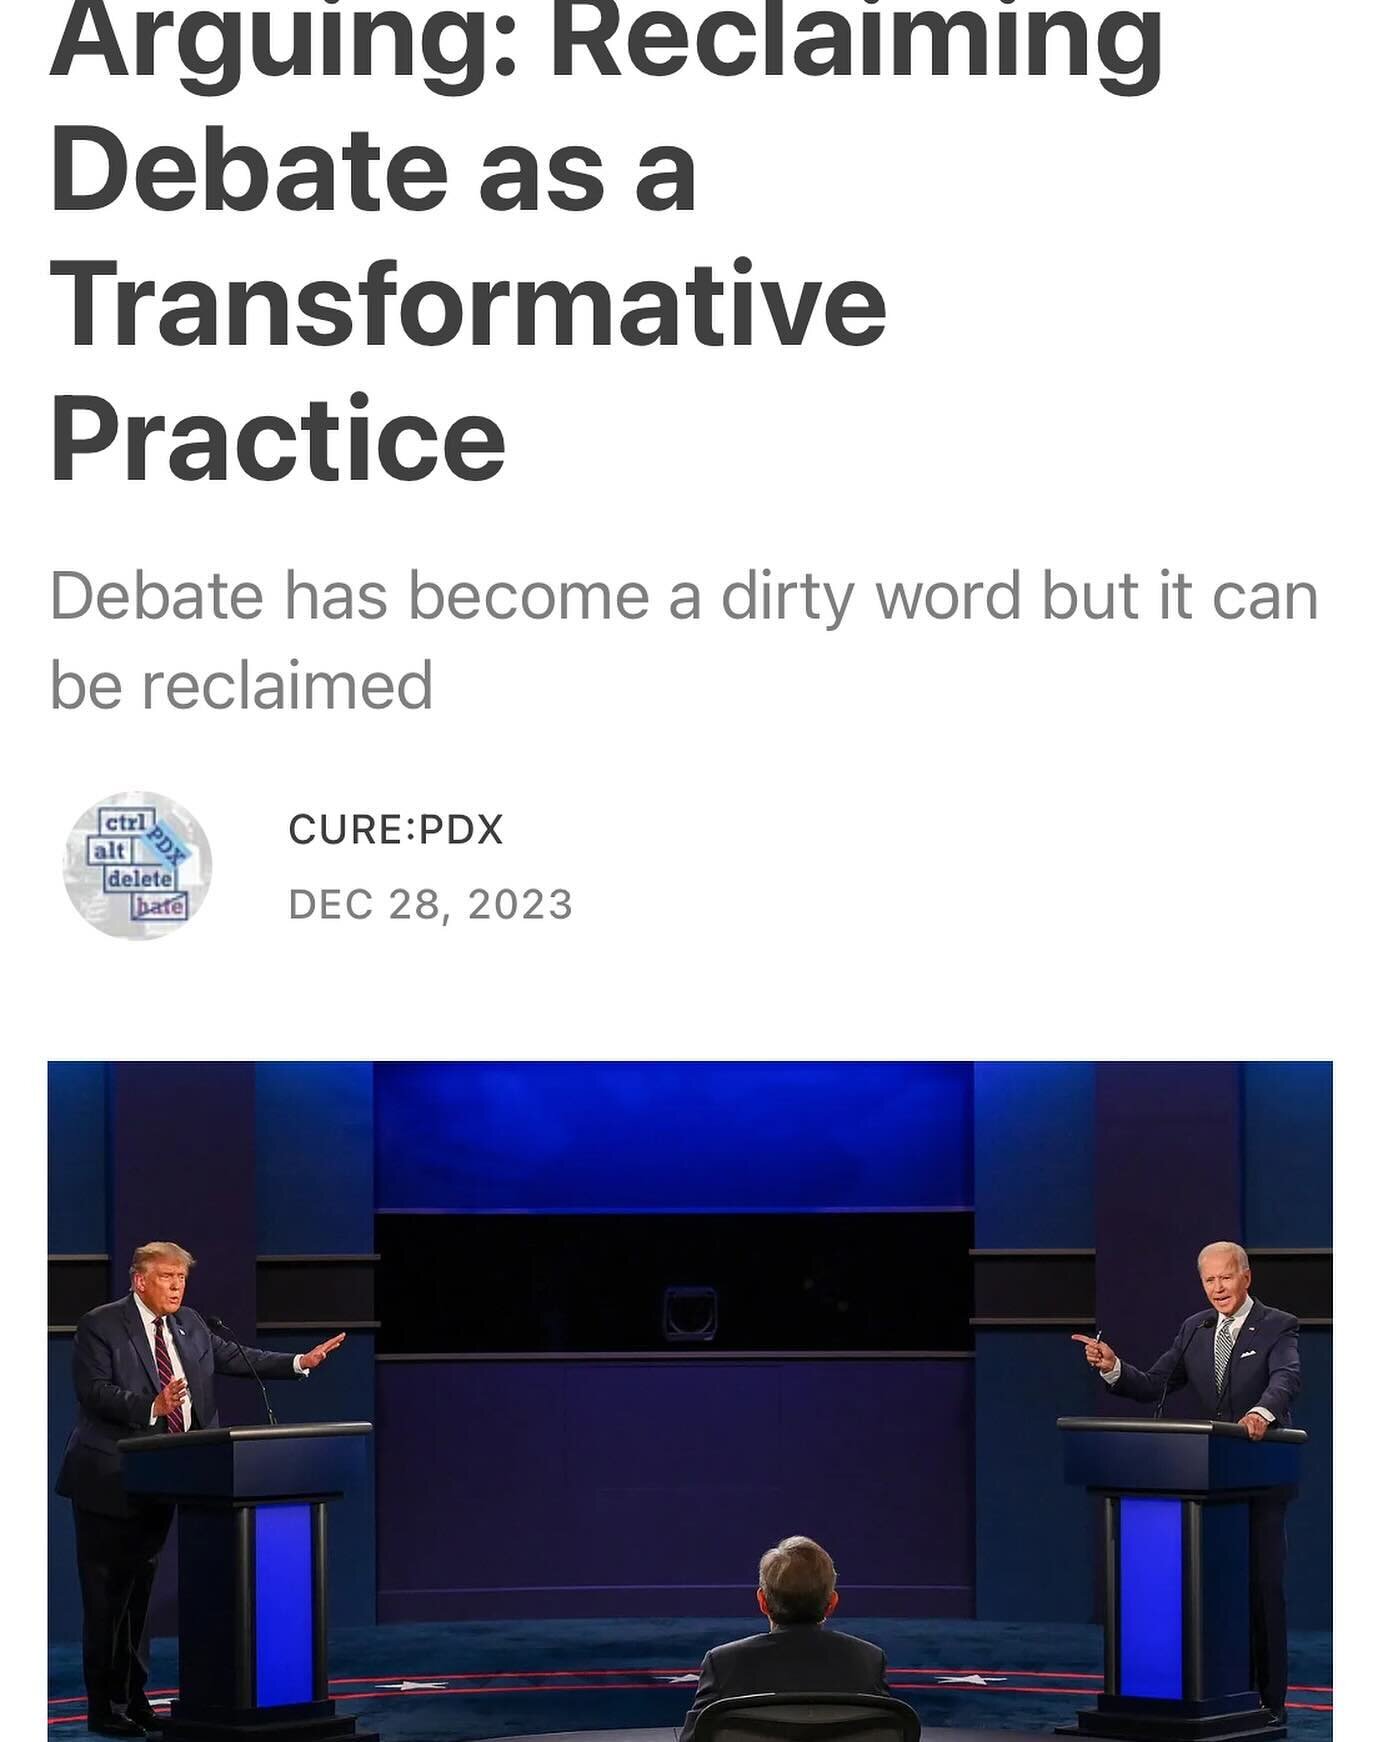 Debate doesn&rsquo;t have to be performative &amp; inciting. @human_paced on the potential of debate &amp; how to harness it ~ check out our SubStack link in our bio https://open.substack.com/pub/curepdx/p/more-arguments-less-arguing-reclaiming?r=kp&